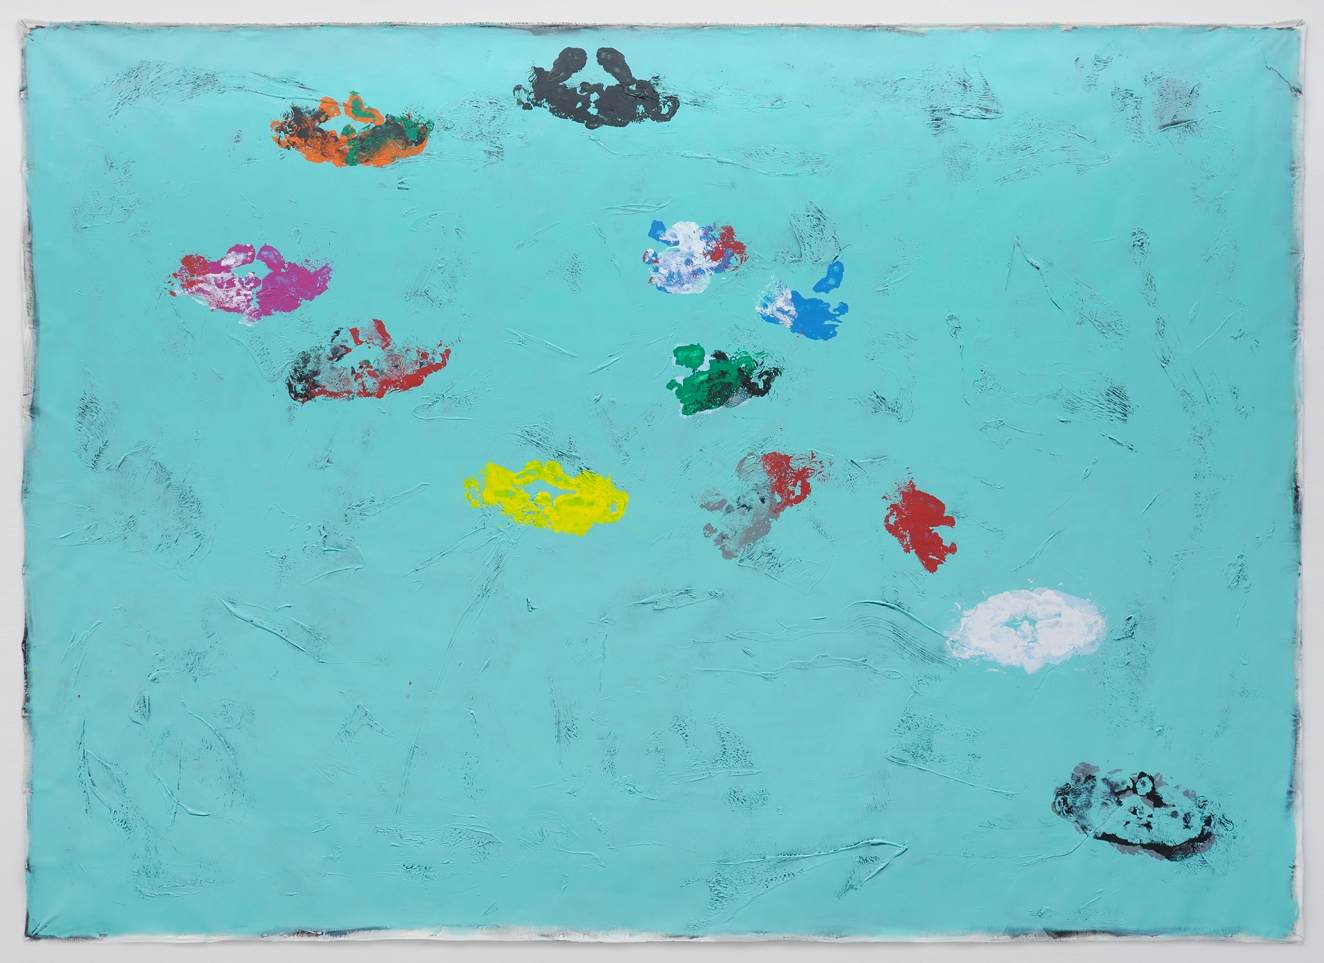 René Luckhardt, untitled (turquoise), 2013, human monotype painting, synthetic polymer acrylics on canvas, 215 x 300 cm